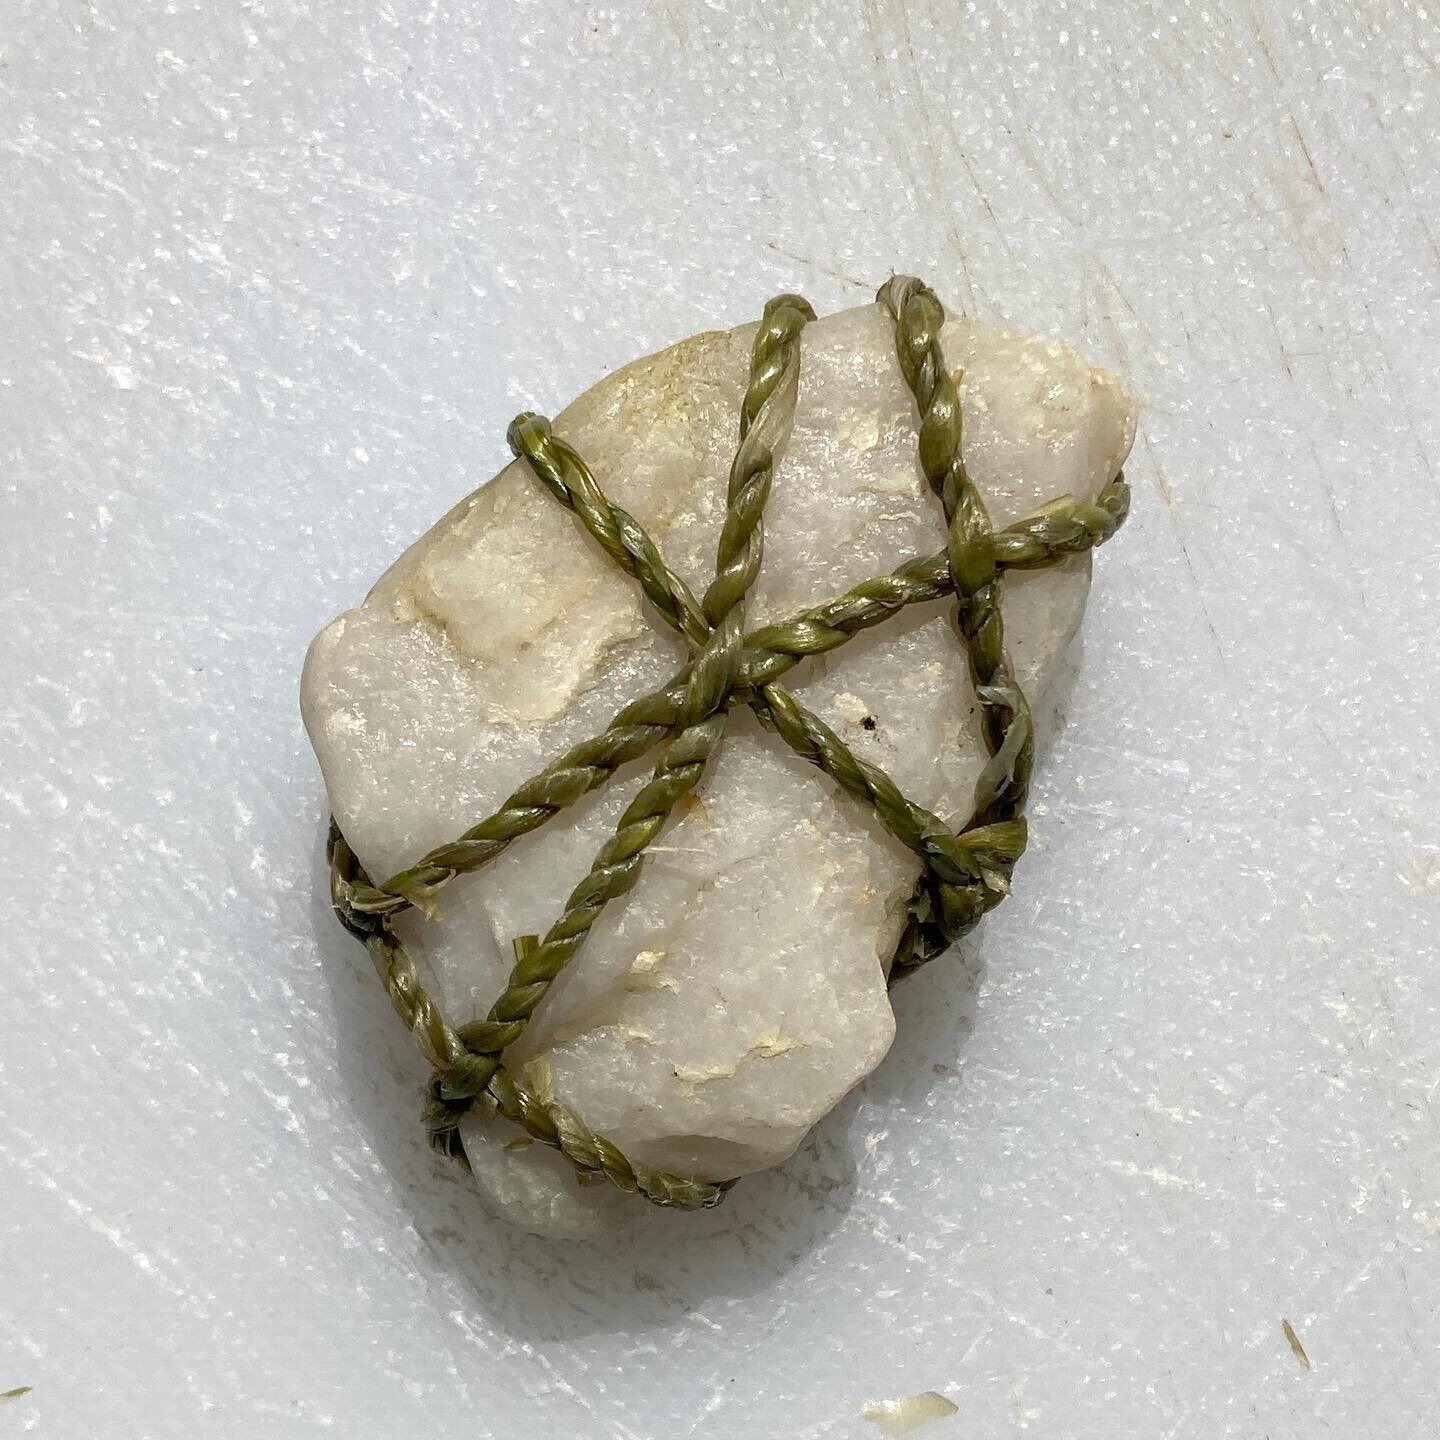 Intertwined overgrown parsley cordage on quartz rock found on Sears Island. 
Deep gratitude to my friend Sandy, whose somewhat haphazard approach to gardening let her parsley grow to 4 feet tall, yielding fiber I could more easily twine into cordage.